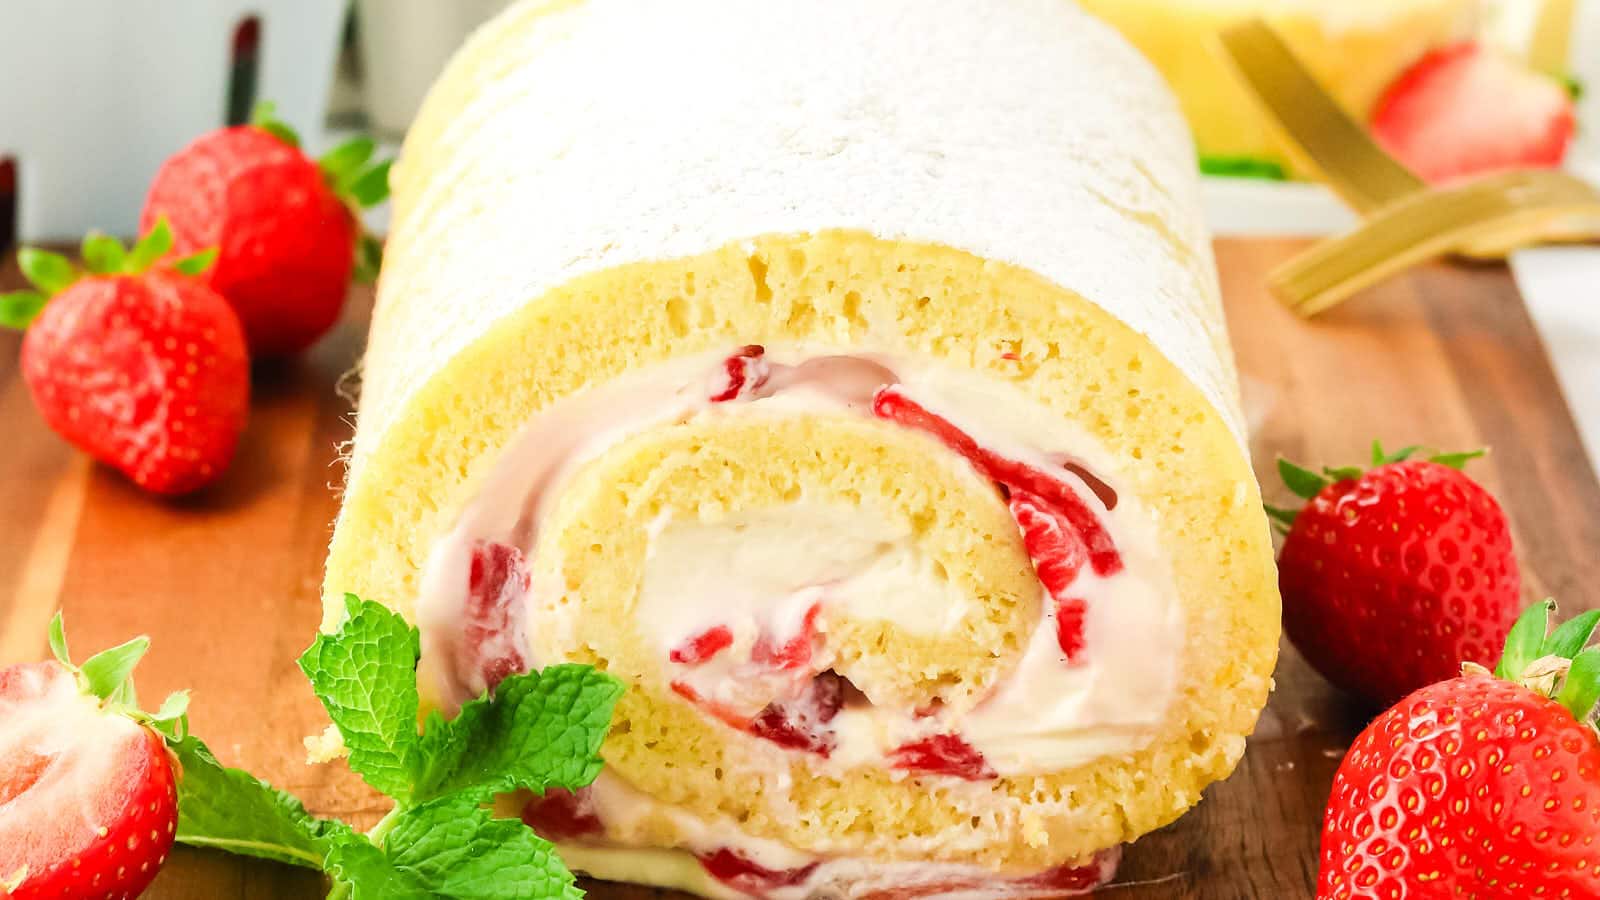 Strawberry Shortcake Roll recipe by Cheerful Cook.